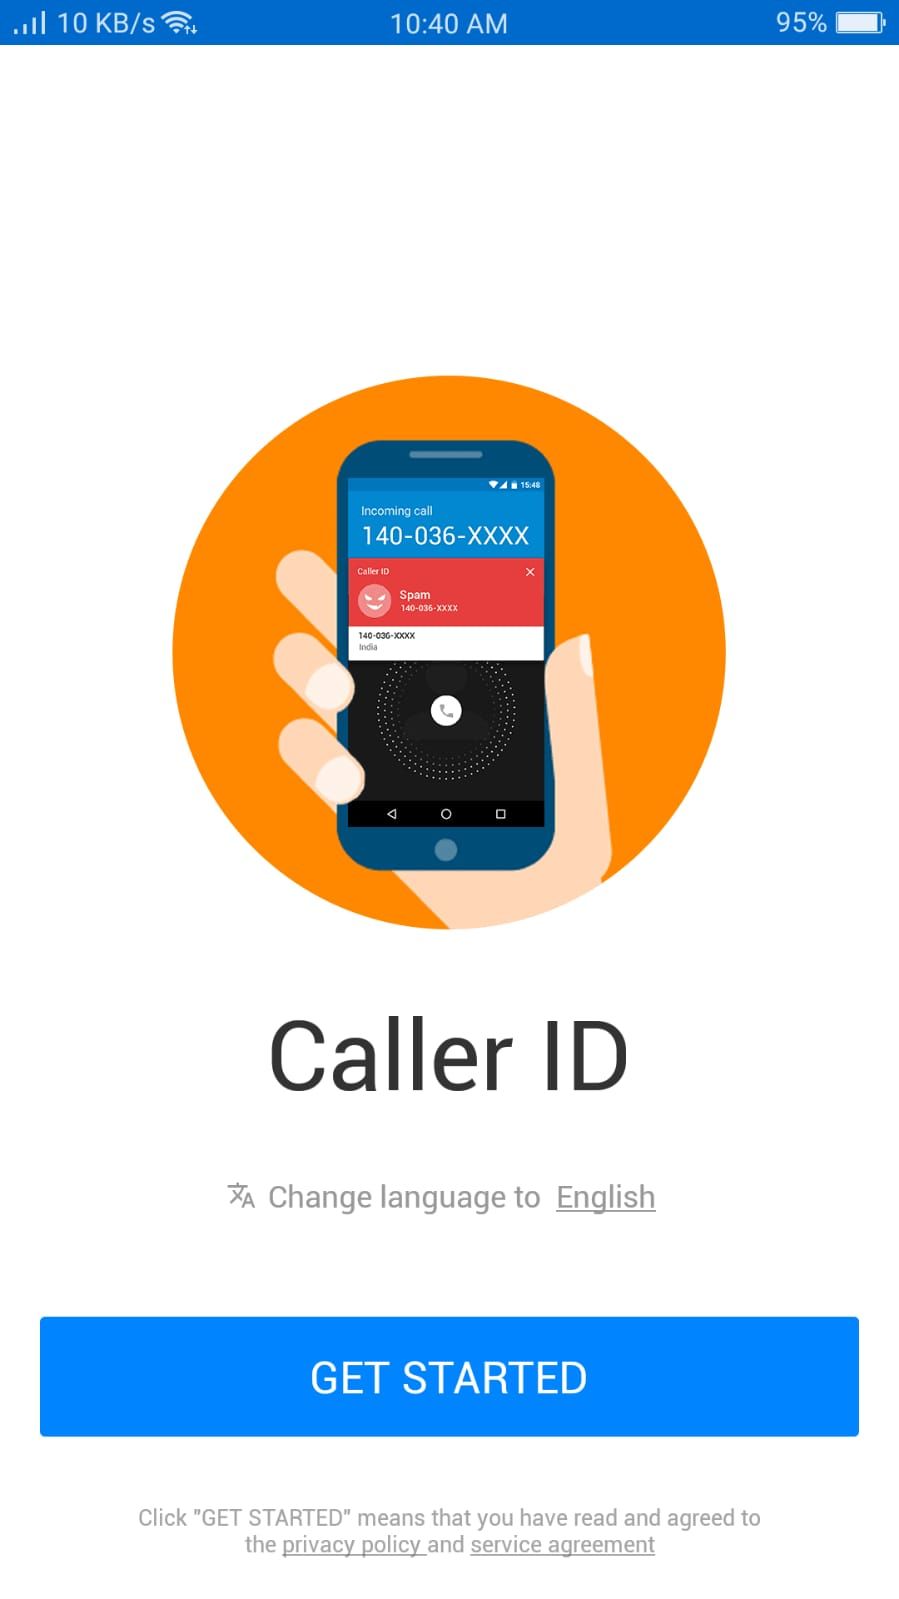 Caller ID - Get Started Page